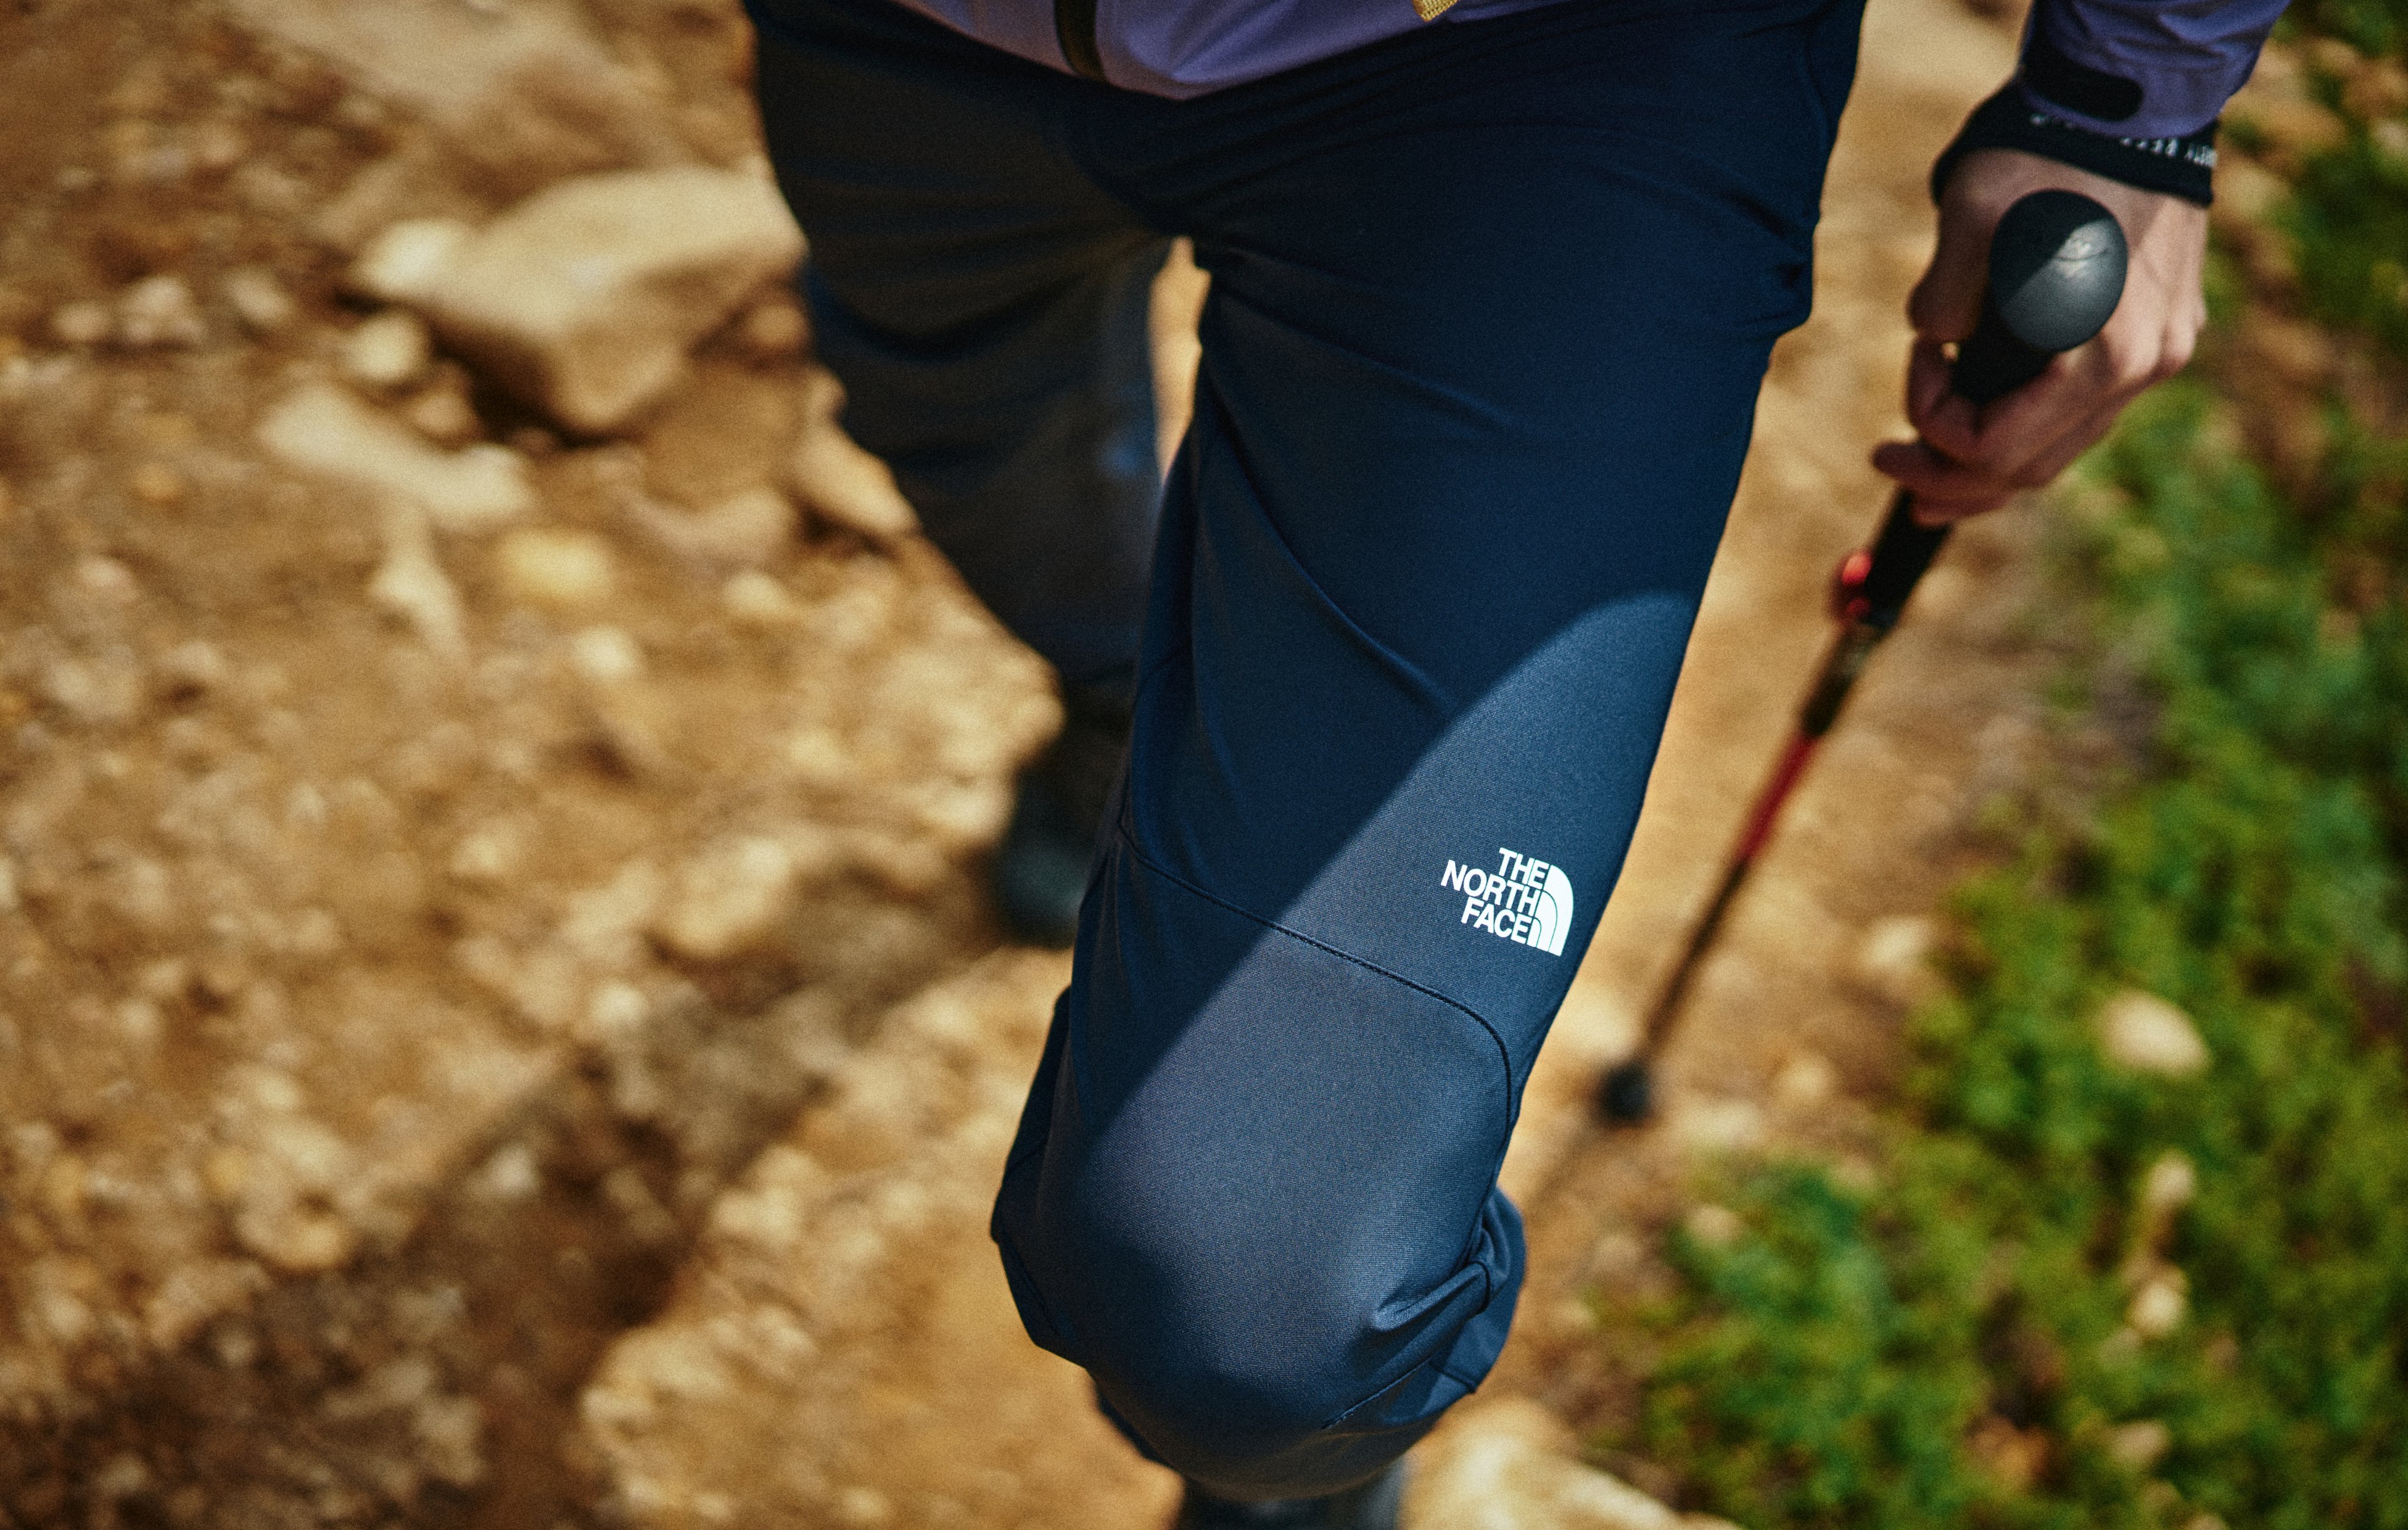 ALPINE LIGHT PANT (NB32301) - THE NORTH FACE MOUNTAIN